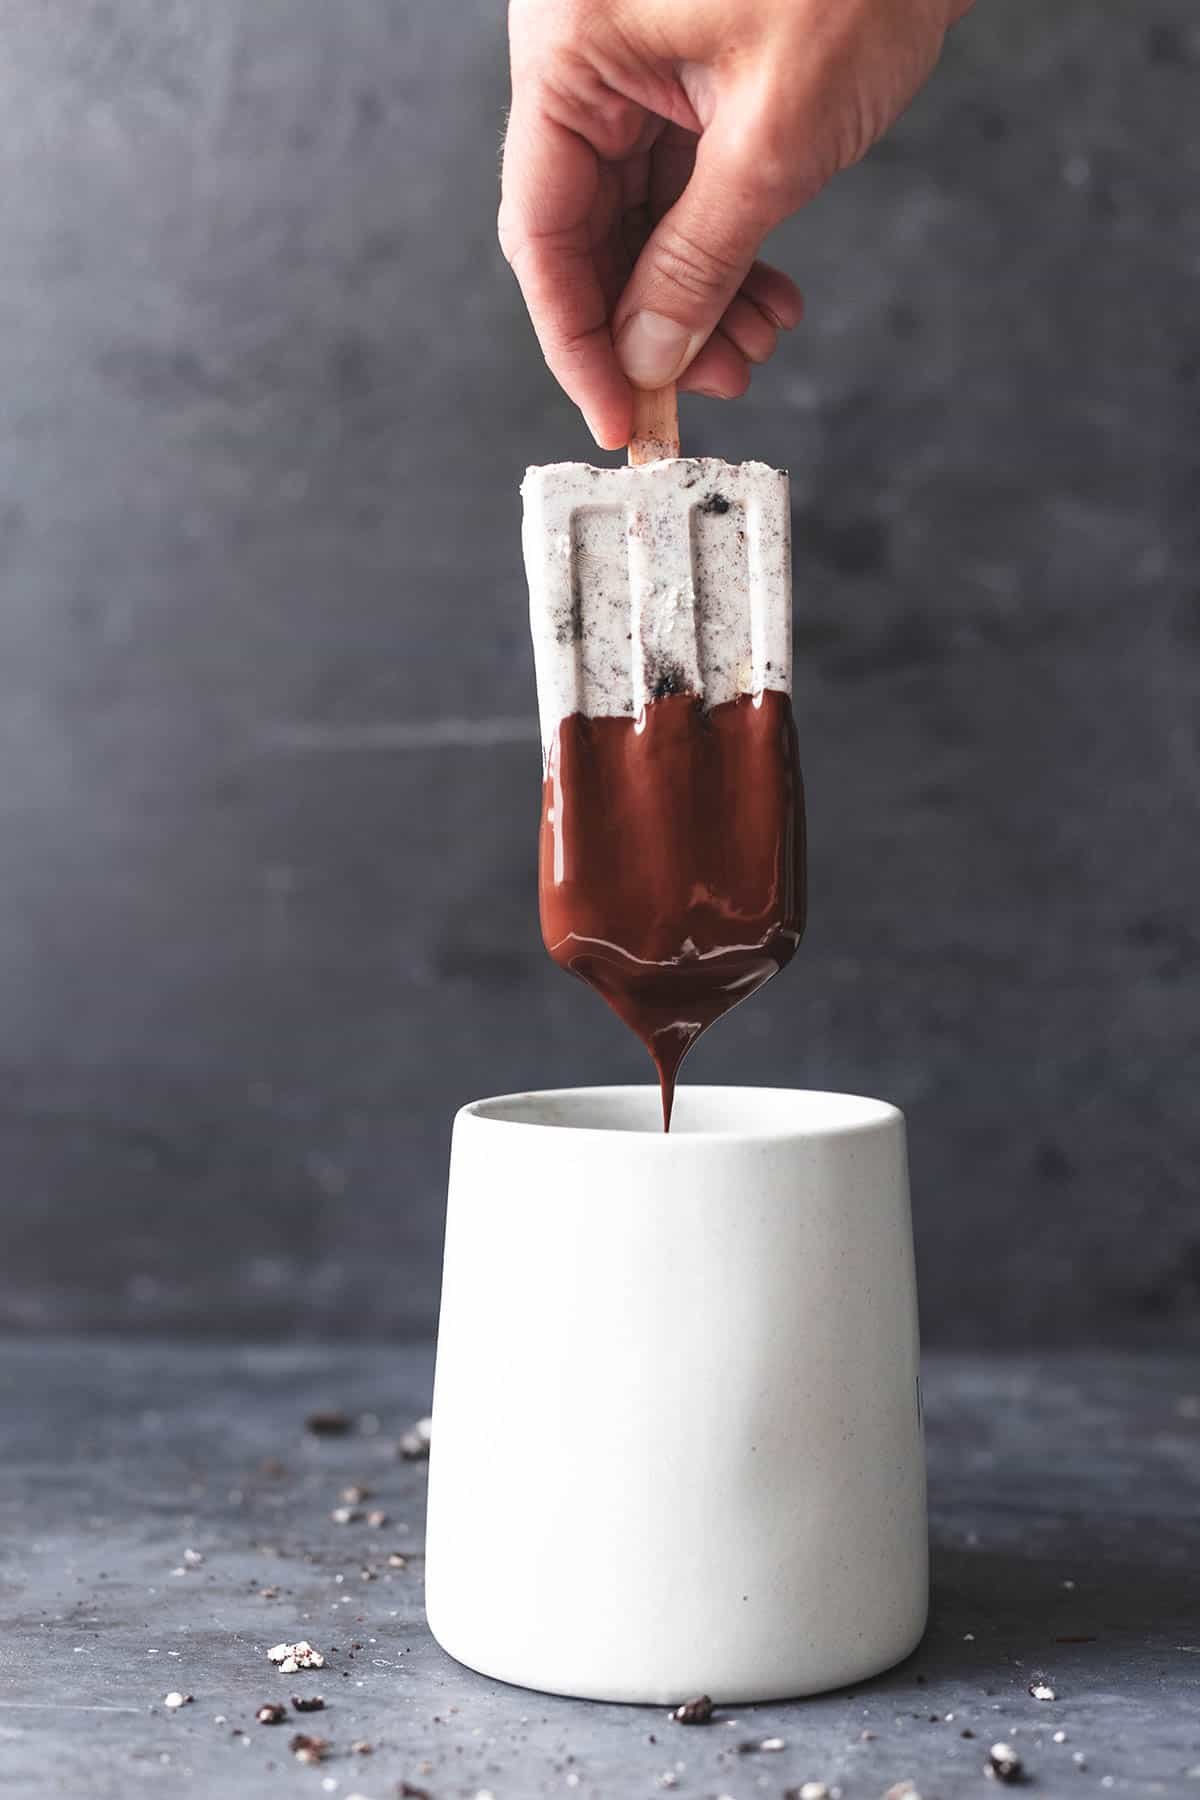 hand dipping popsicle in mug of melted chocolate